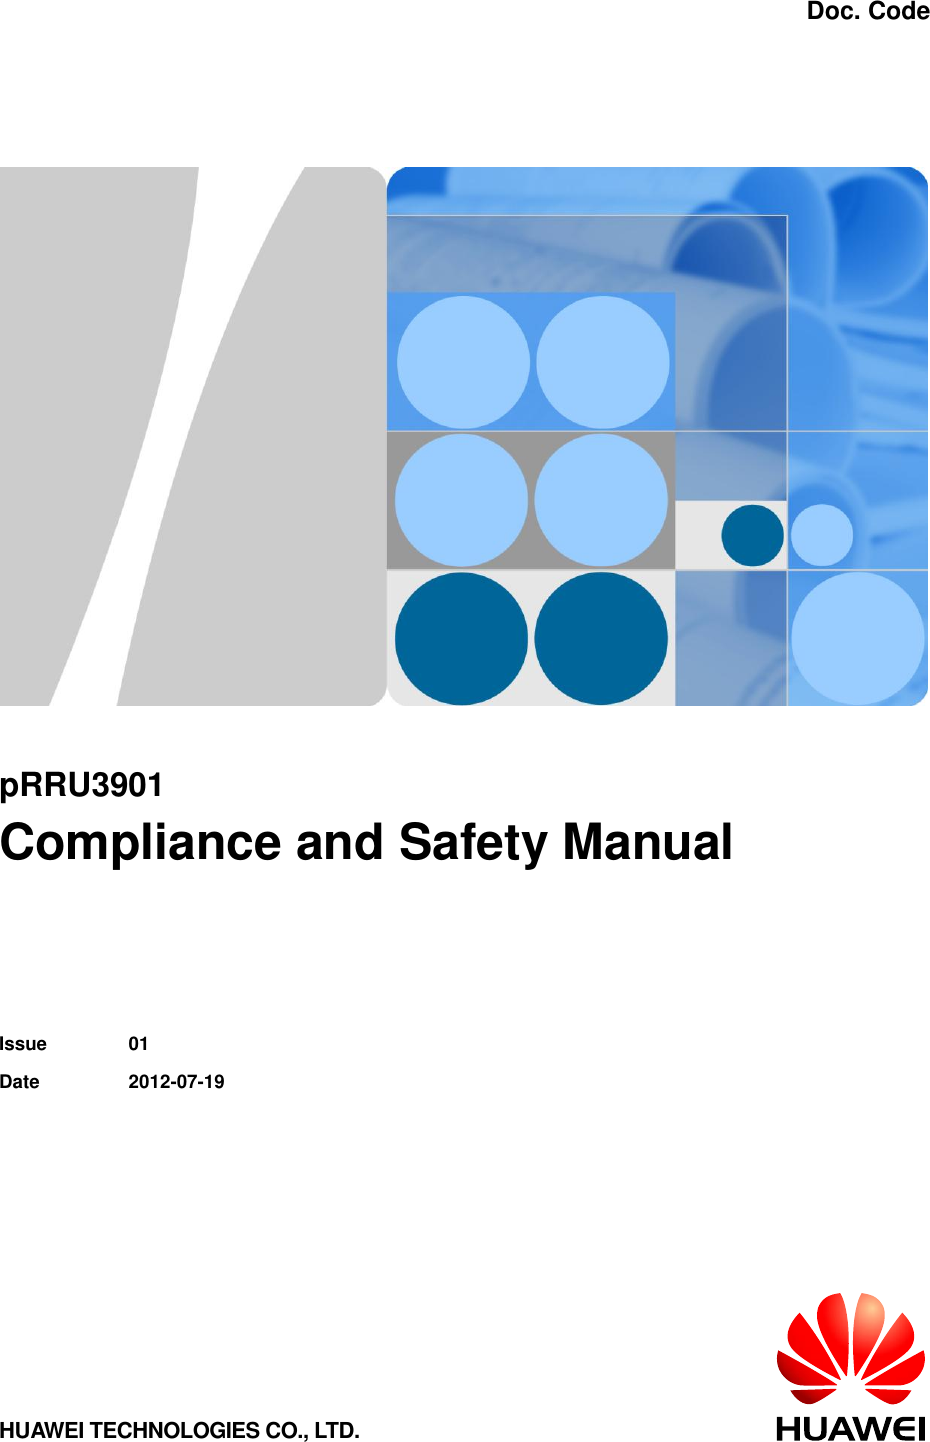    Doc. Code    pRRU3901 Compliance and Safety Manual   Issue 01 Date 2012-07-19  HUAWEI TECHNOLOGIES CO., LTD.  